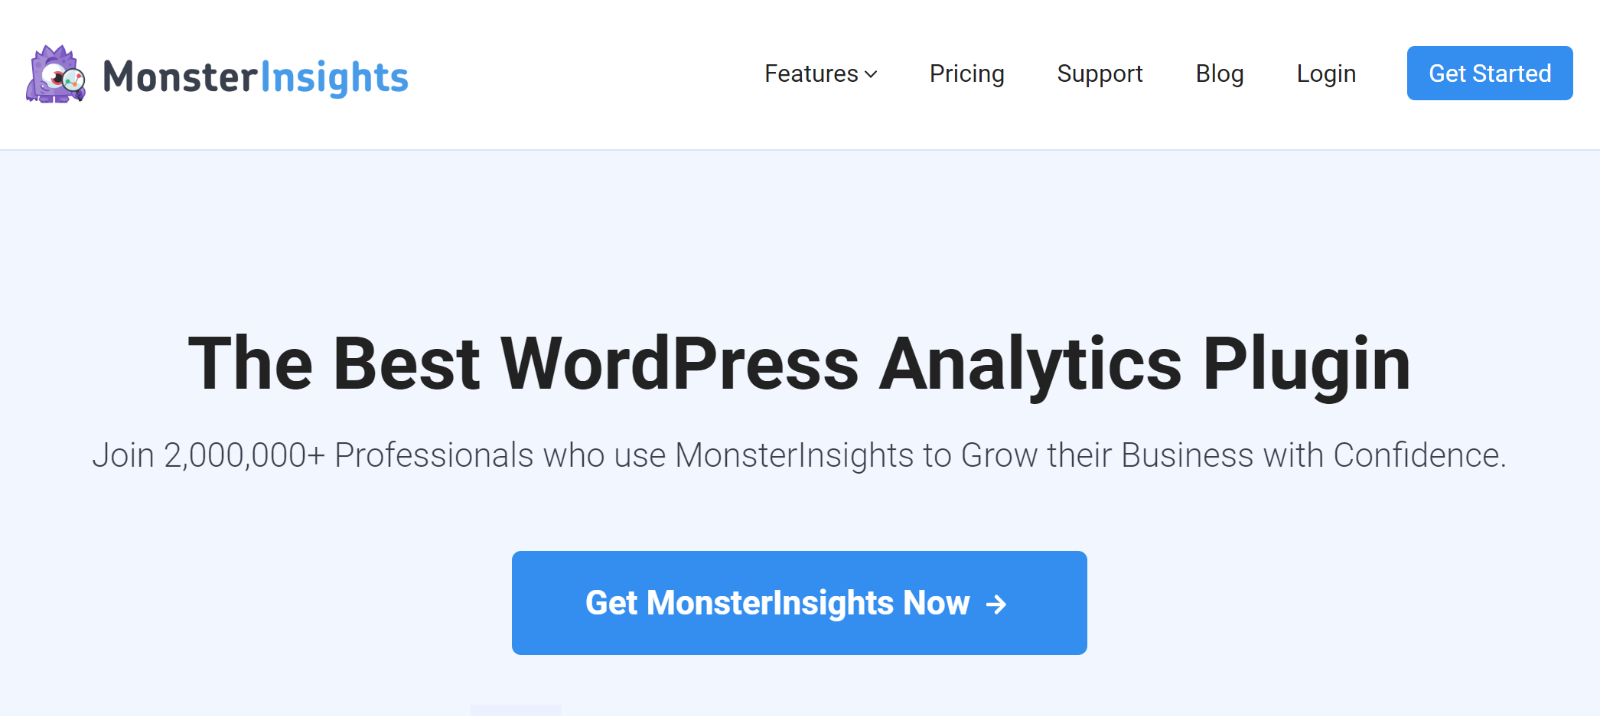 The MonsterInsights homepage